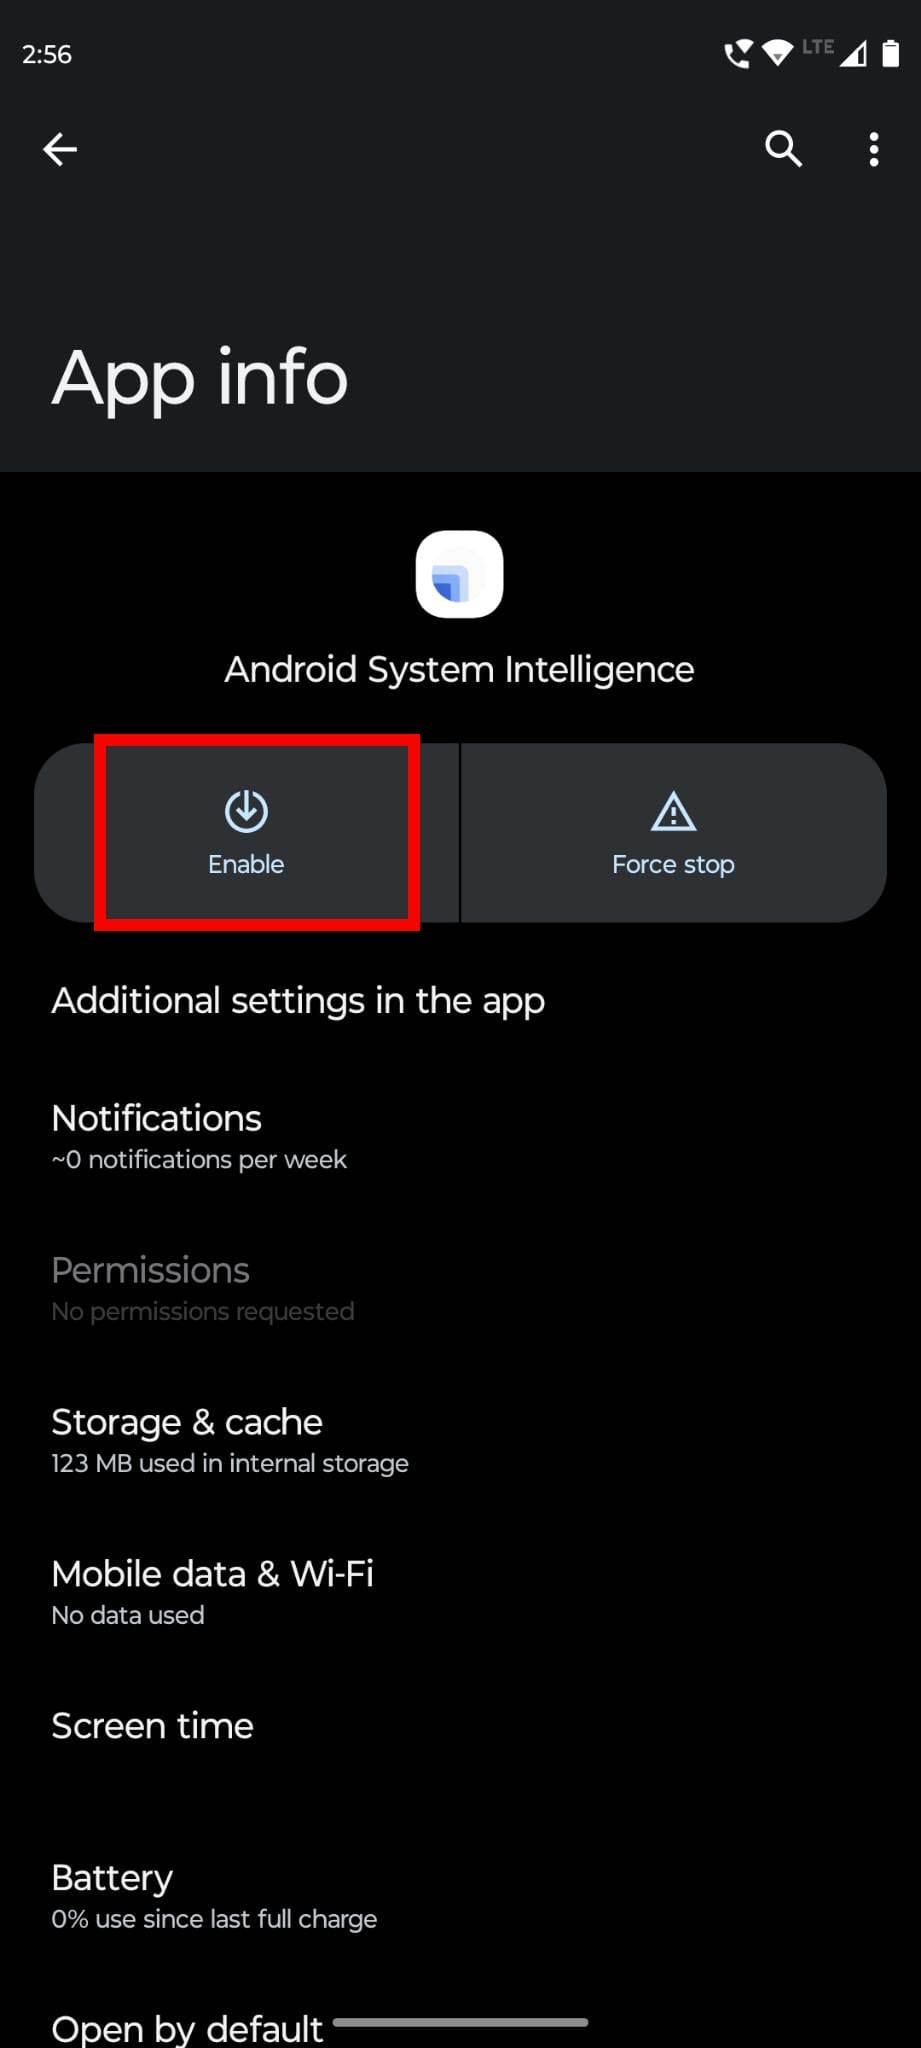 Tap on Enable button to enable this app